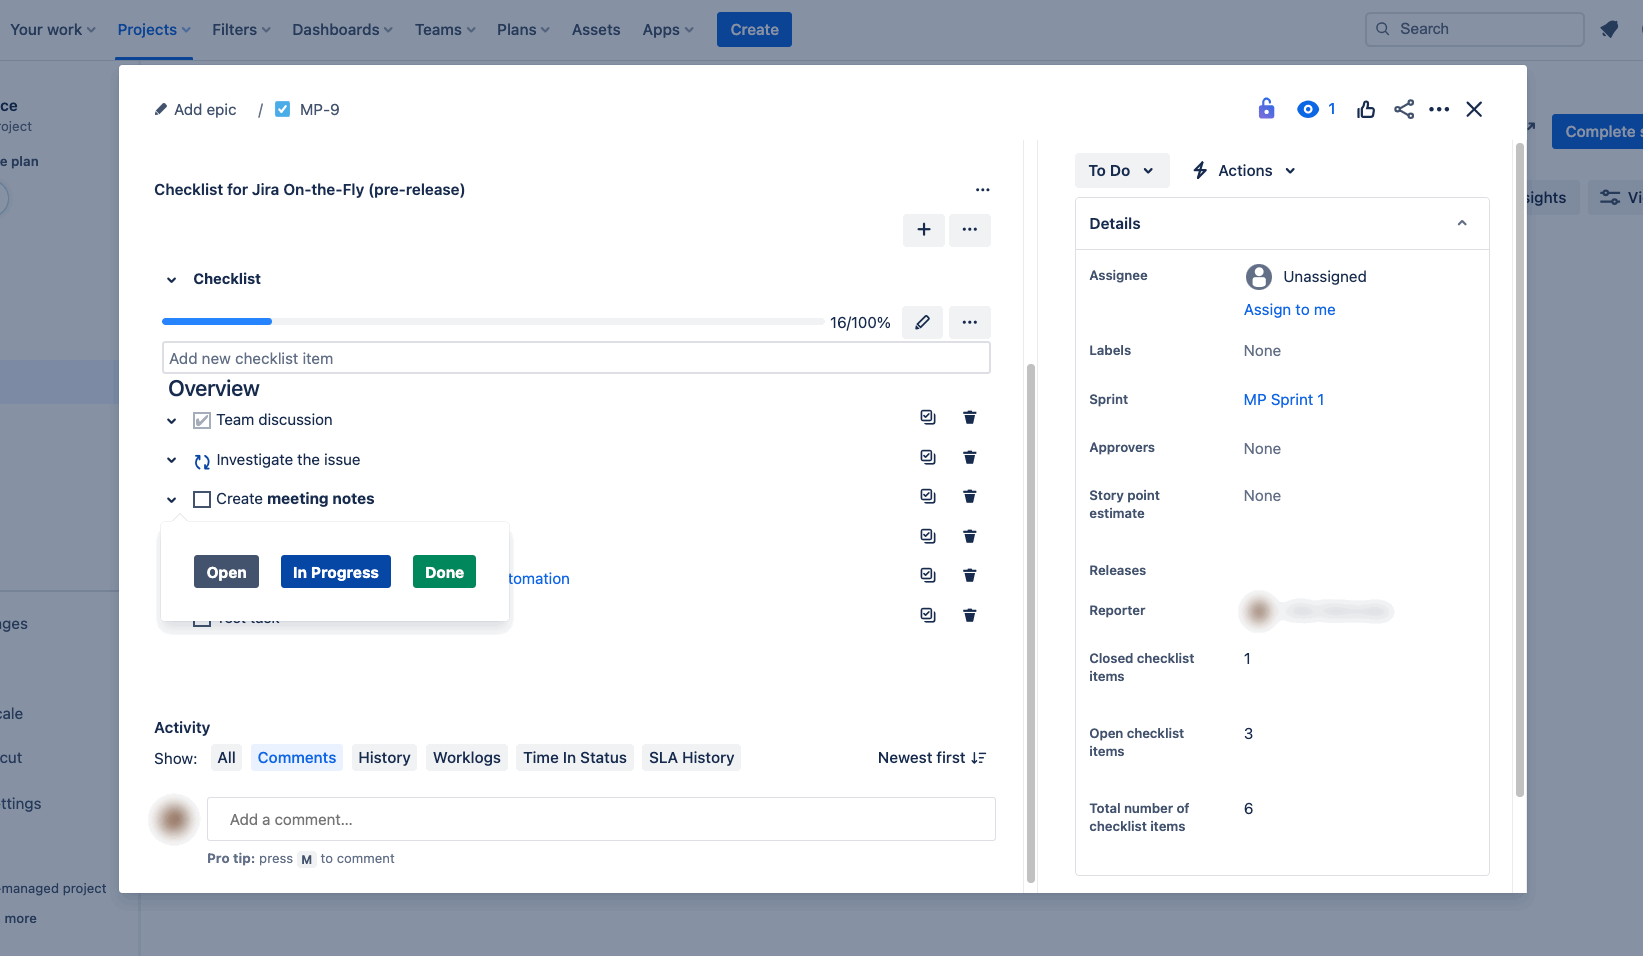 Getting Started - Use Checklist for Jira On-the-Fly.gif